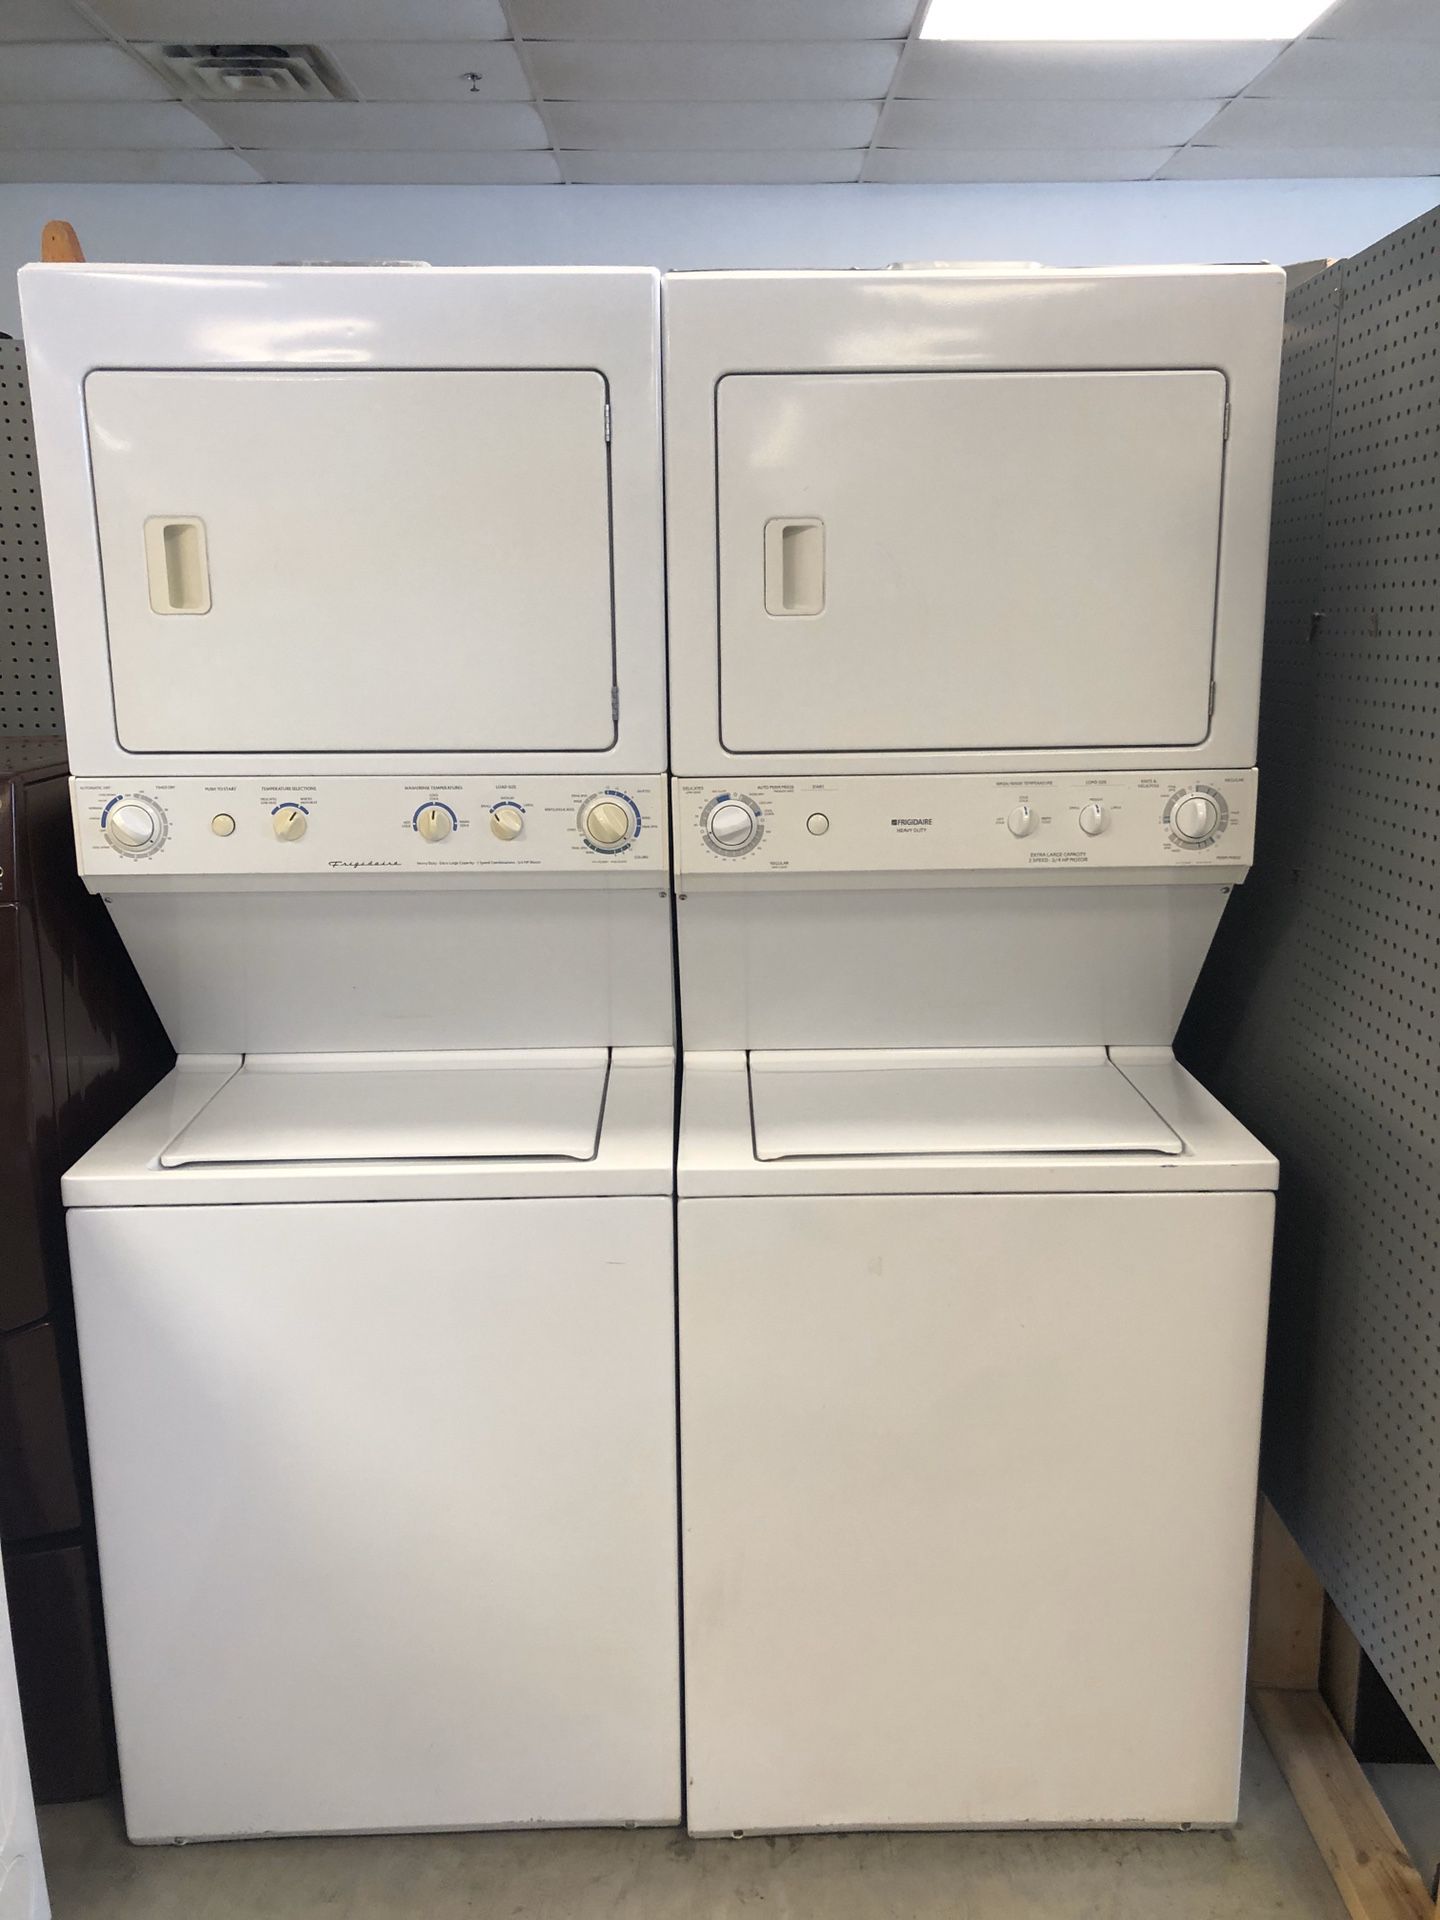 Frigidaire washer and dryer sets